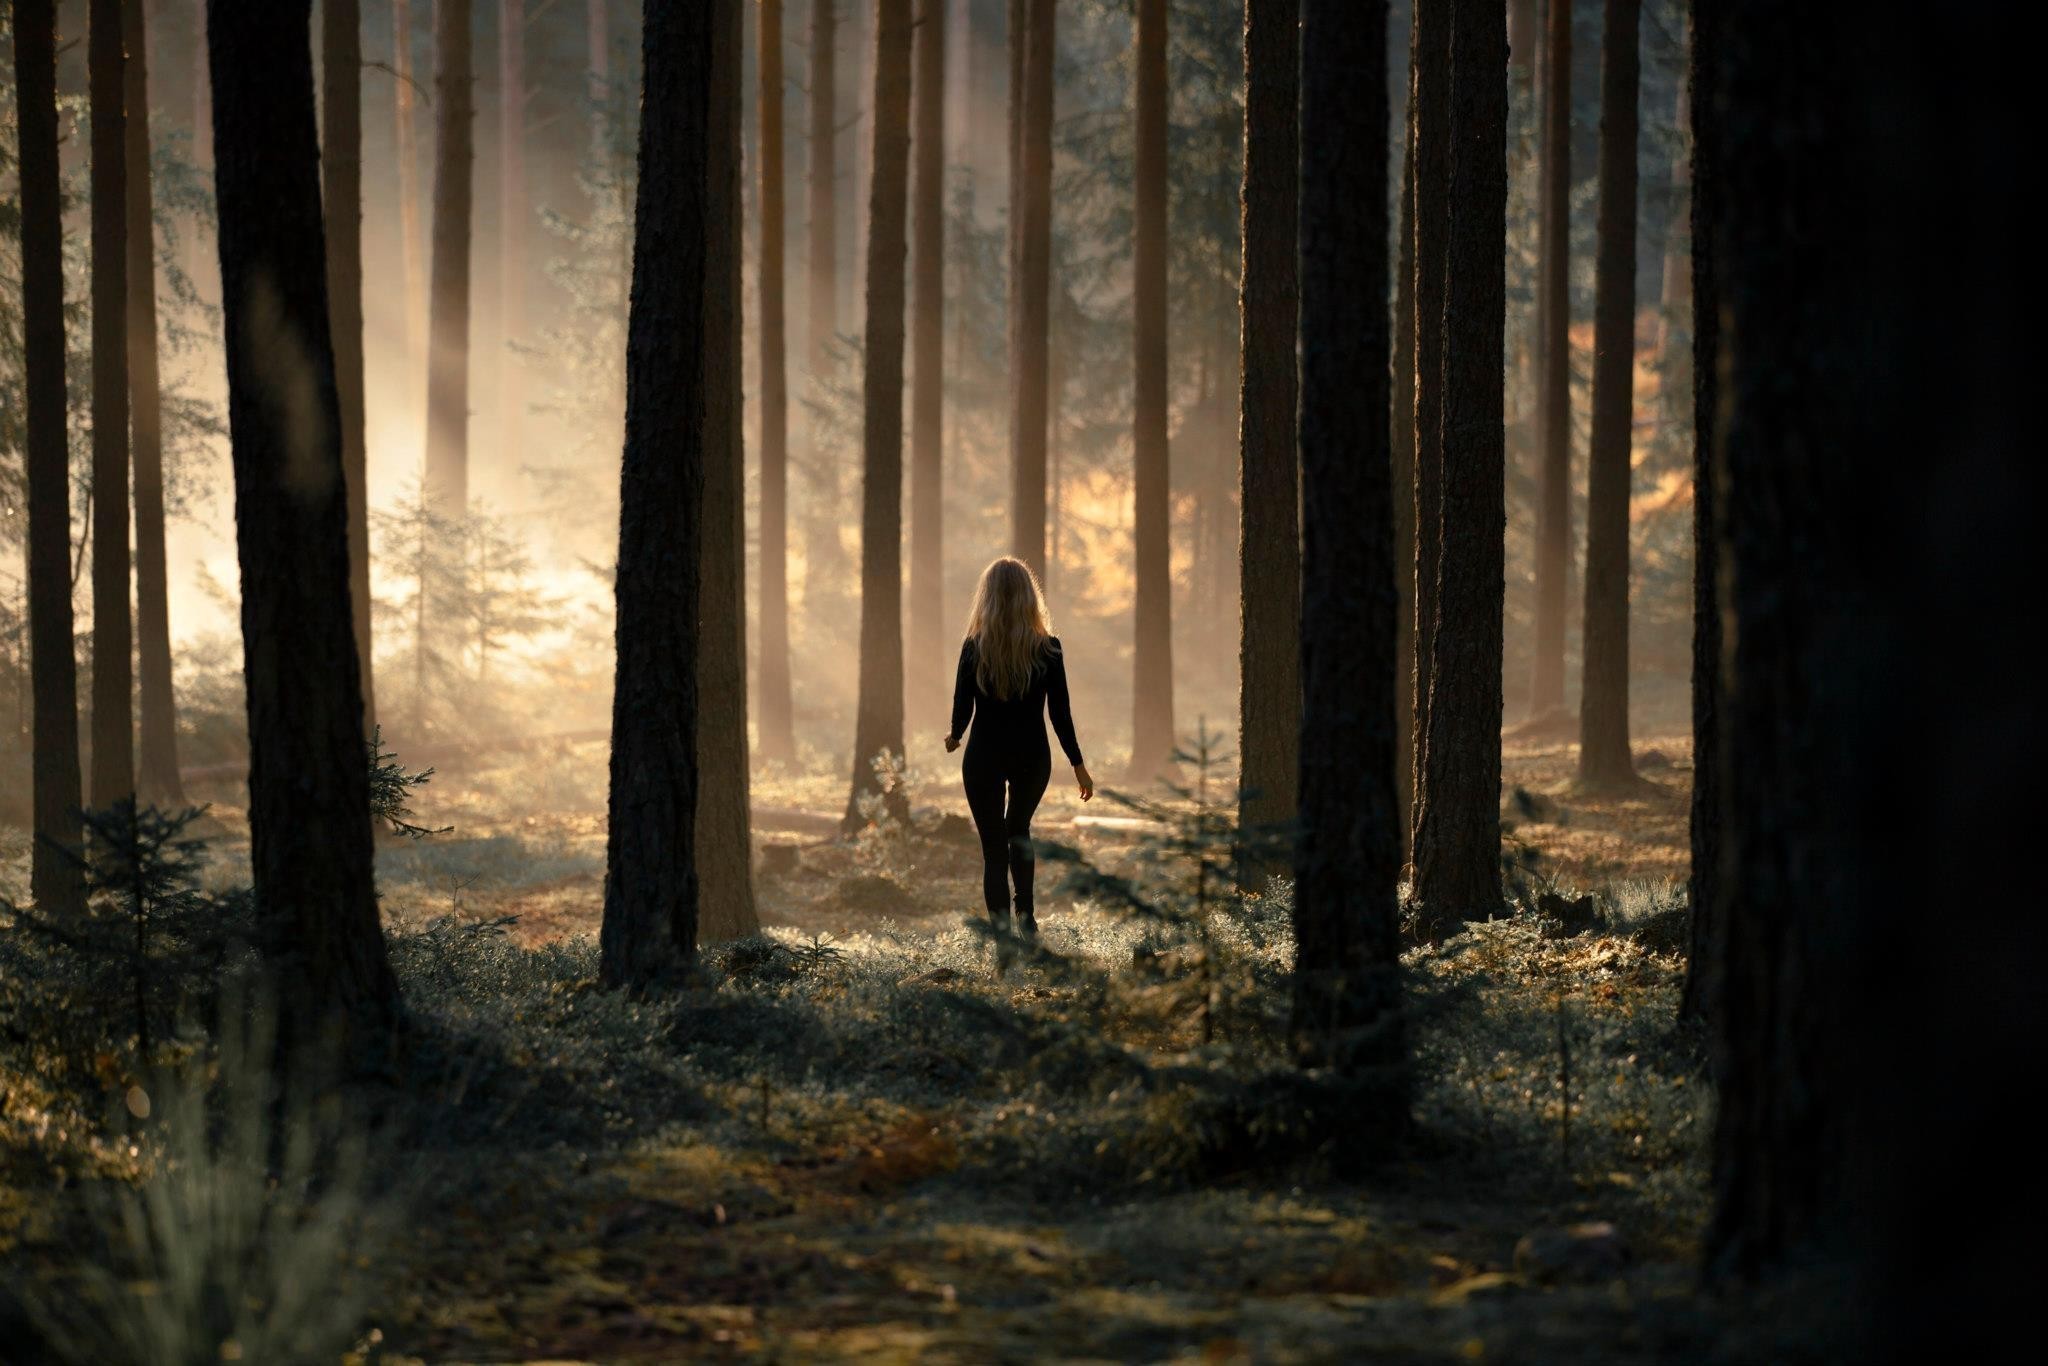 People 2048x1366 forest women trees mist sunlight plants blonde walking the gap green brown pine trees black clothing shrubs atmosphere nature solice women outdoors